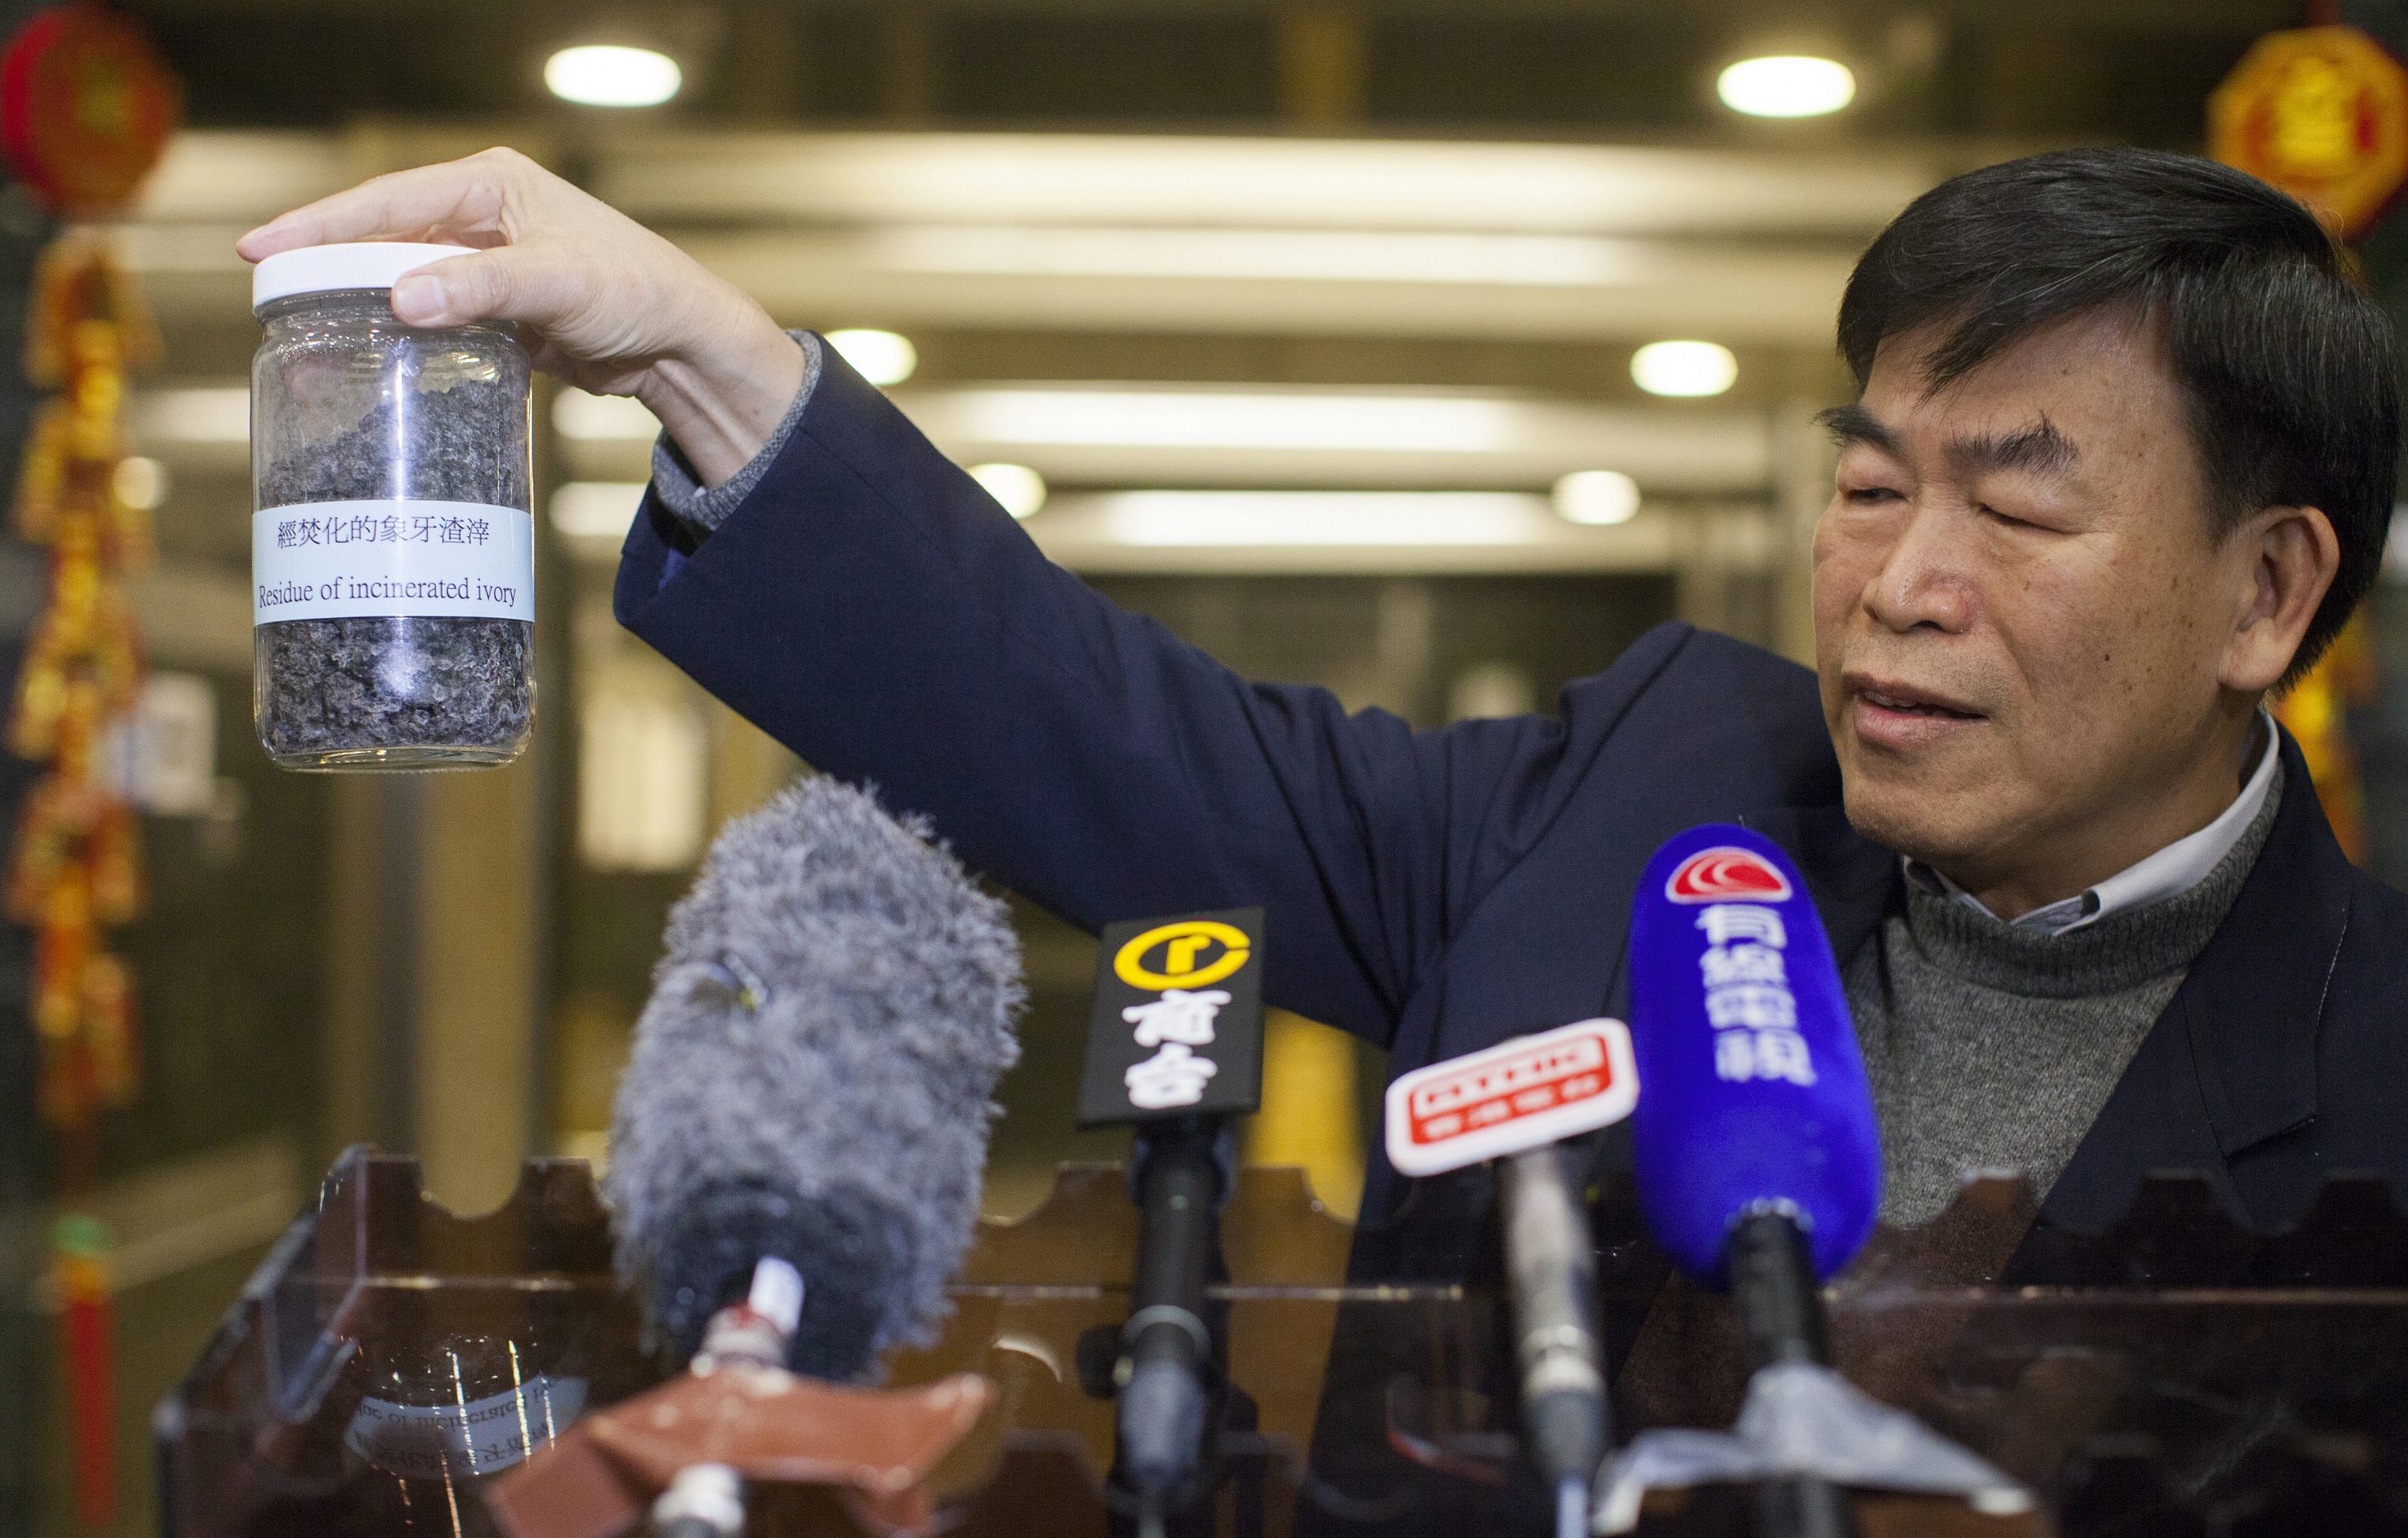 Dr Paul Shin, Chairman of the Endangered Species Advisory Committee of Hong Kong's Agriculture, Fisheries and Conservation Department, holds up a jar of incinerated ivory residue at a press conference. Photo: EPA